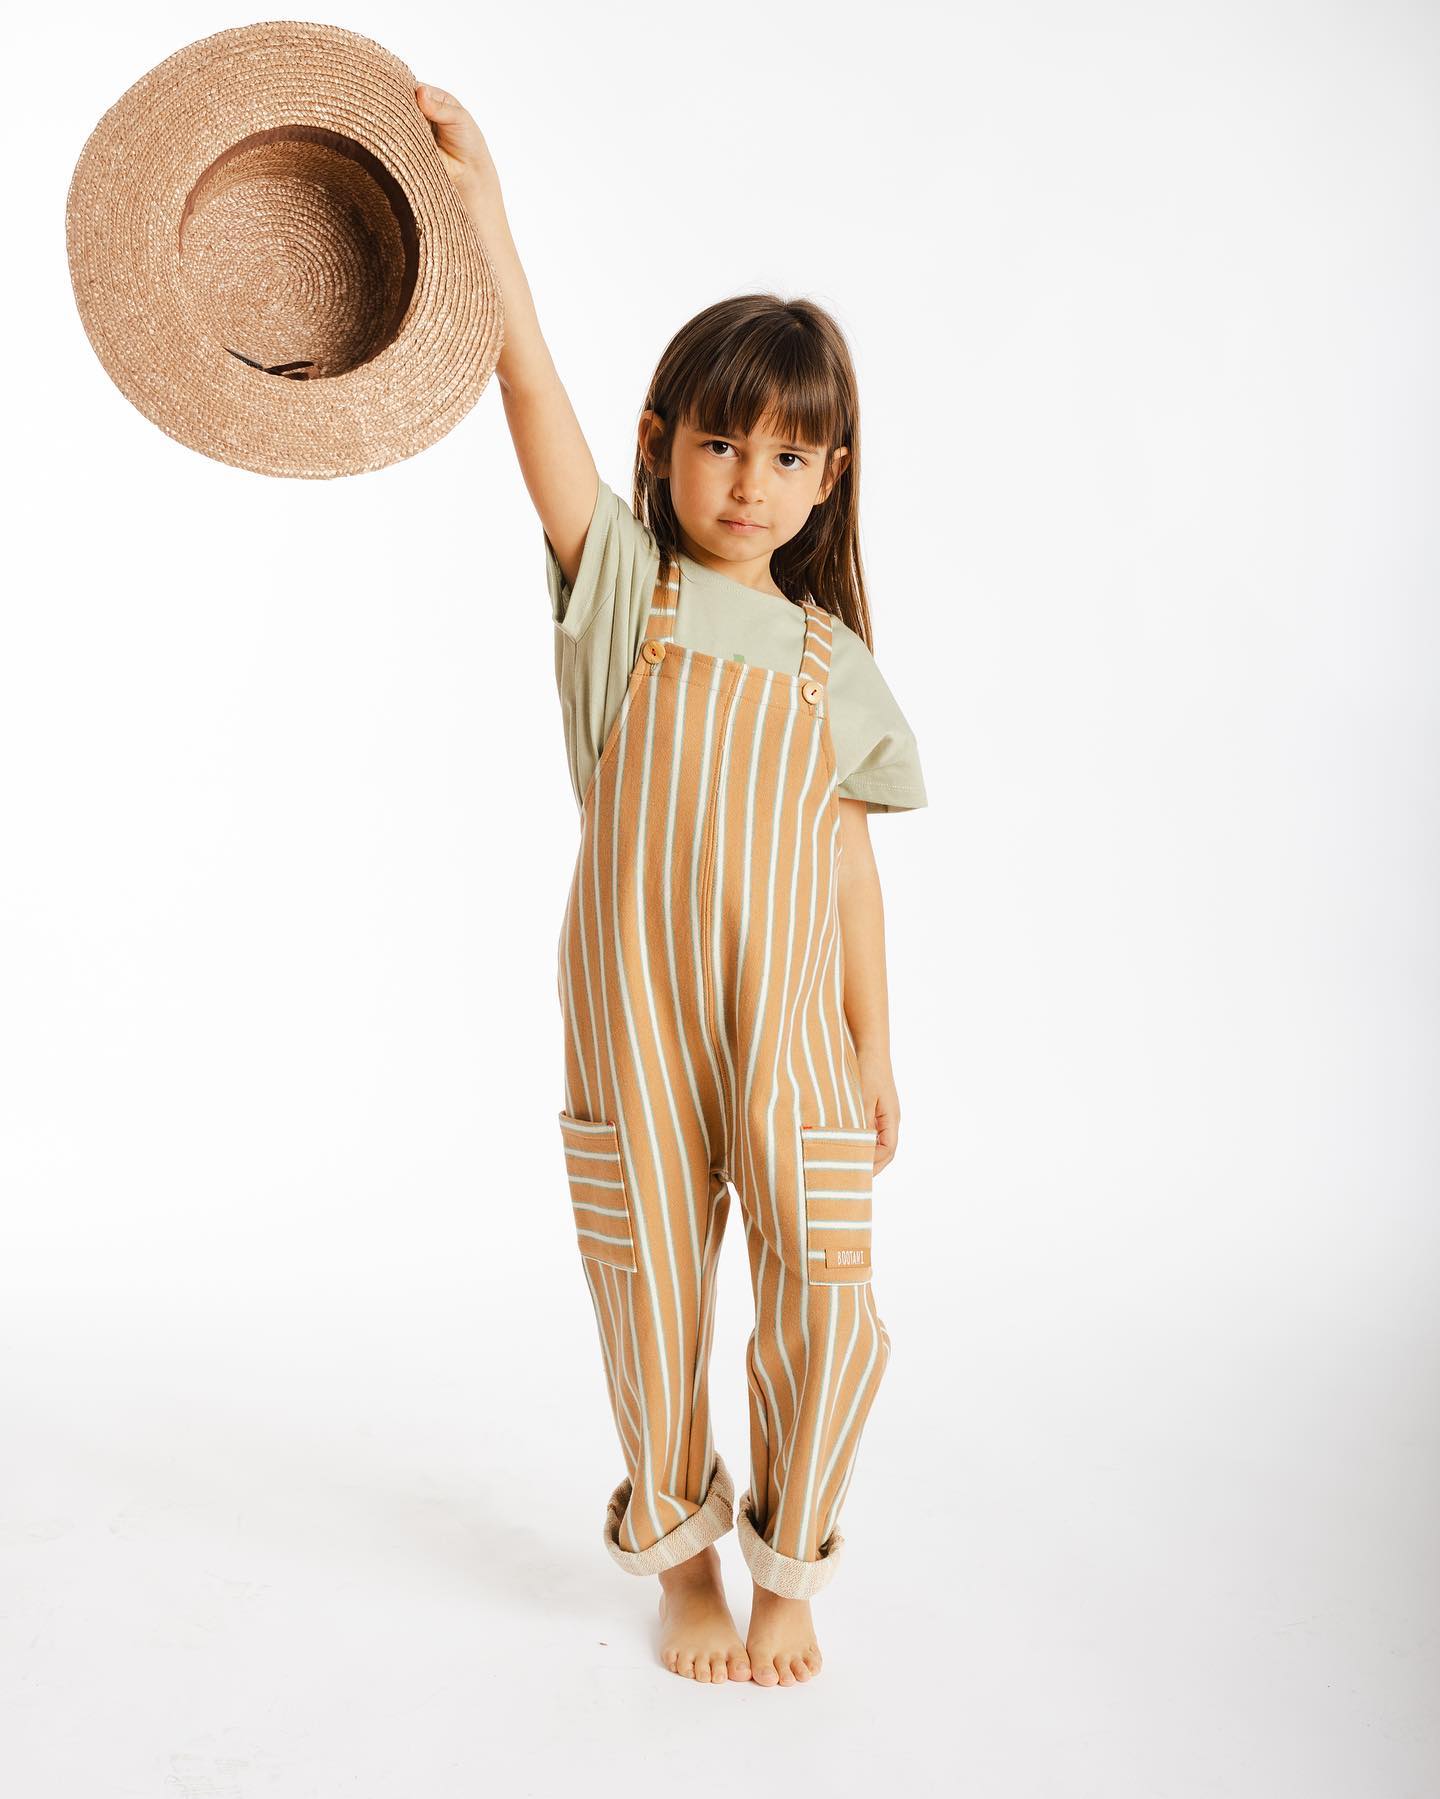 BOOTANI KIDS-high quality clothes with appealing graphic designs for the little ones